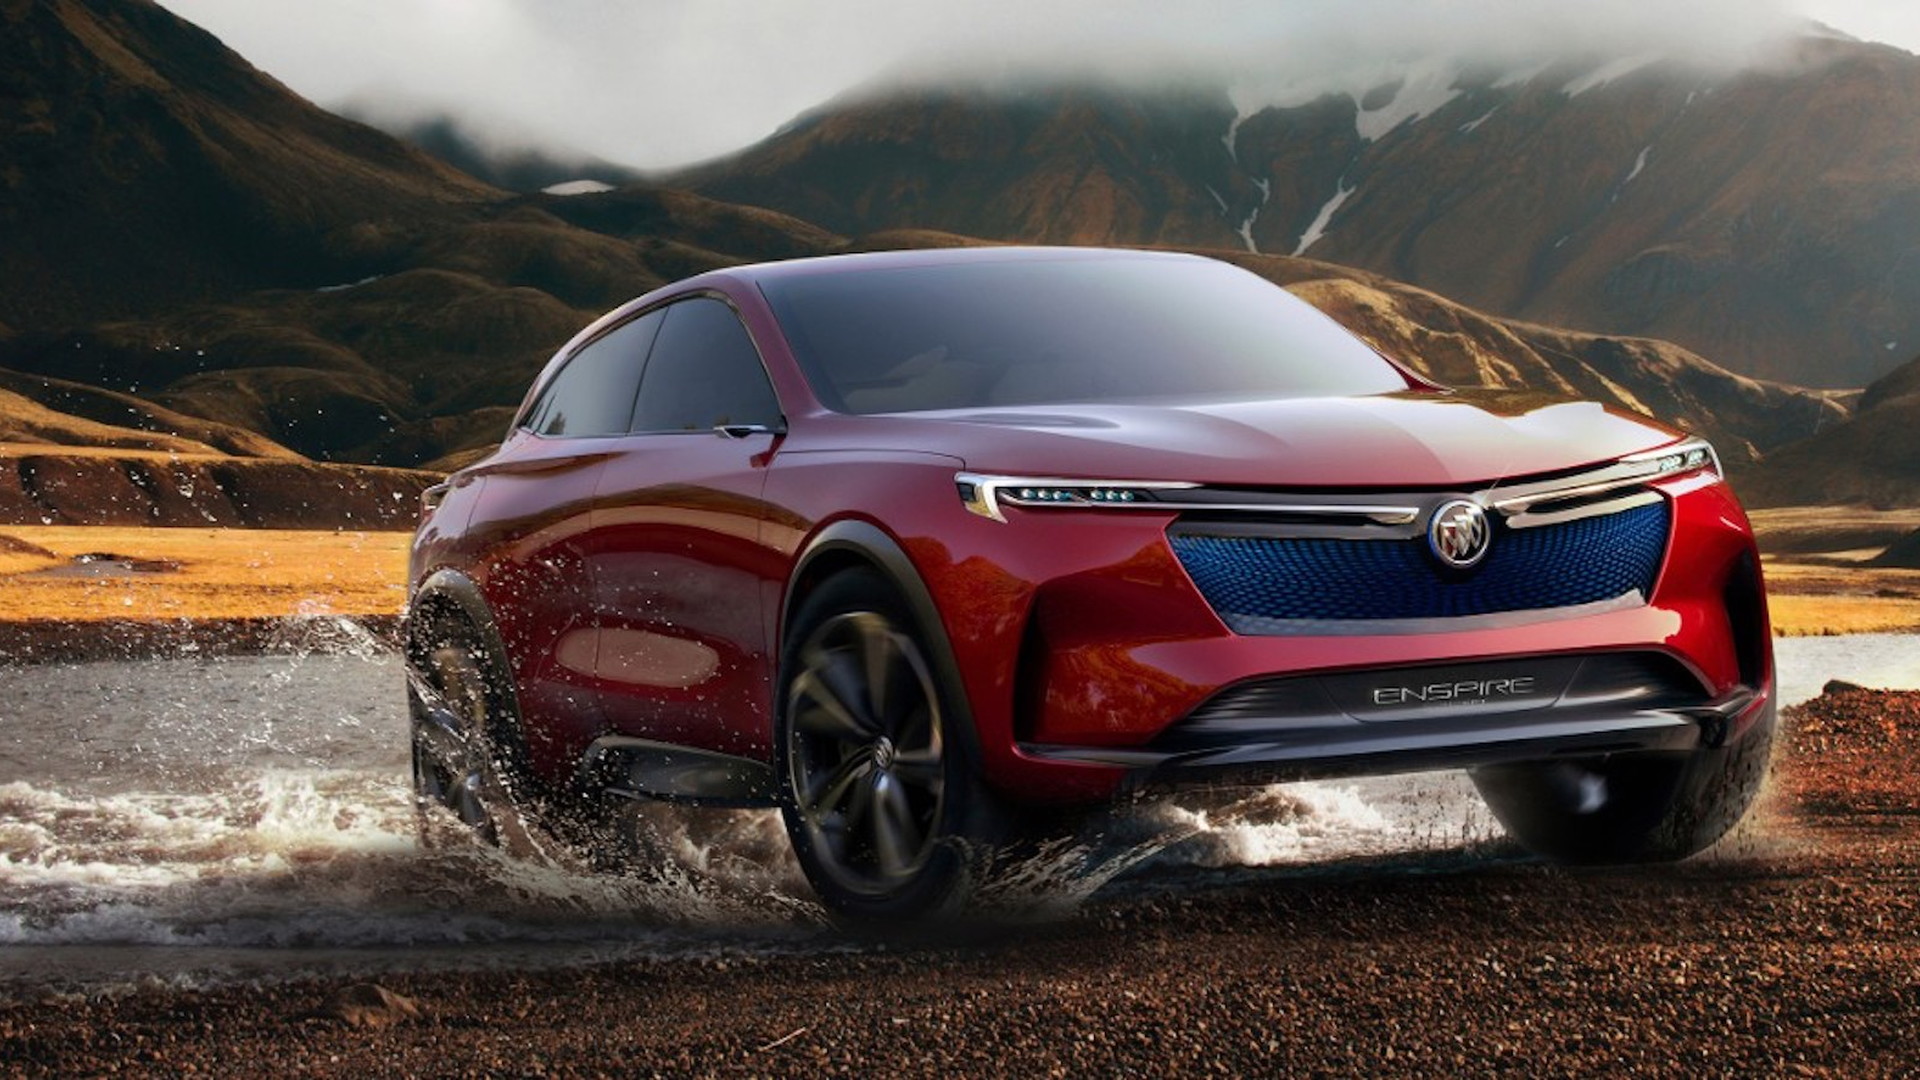 Buick Enspire electric SUV concept